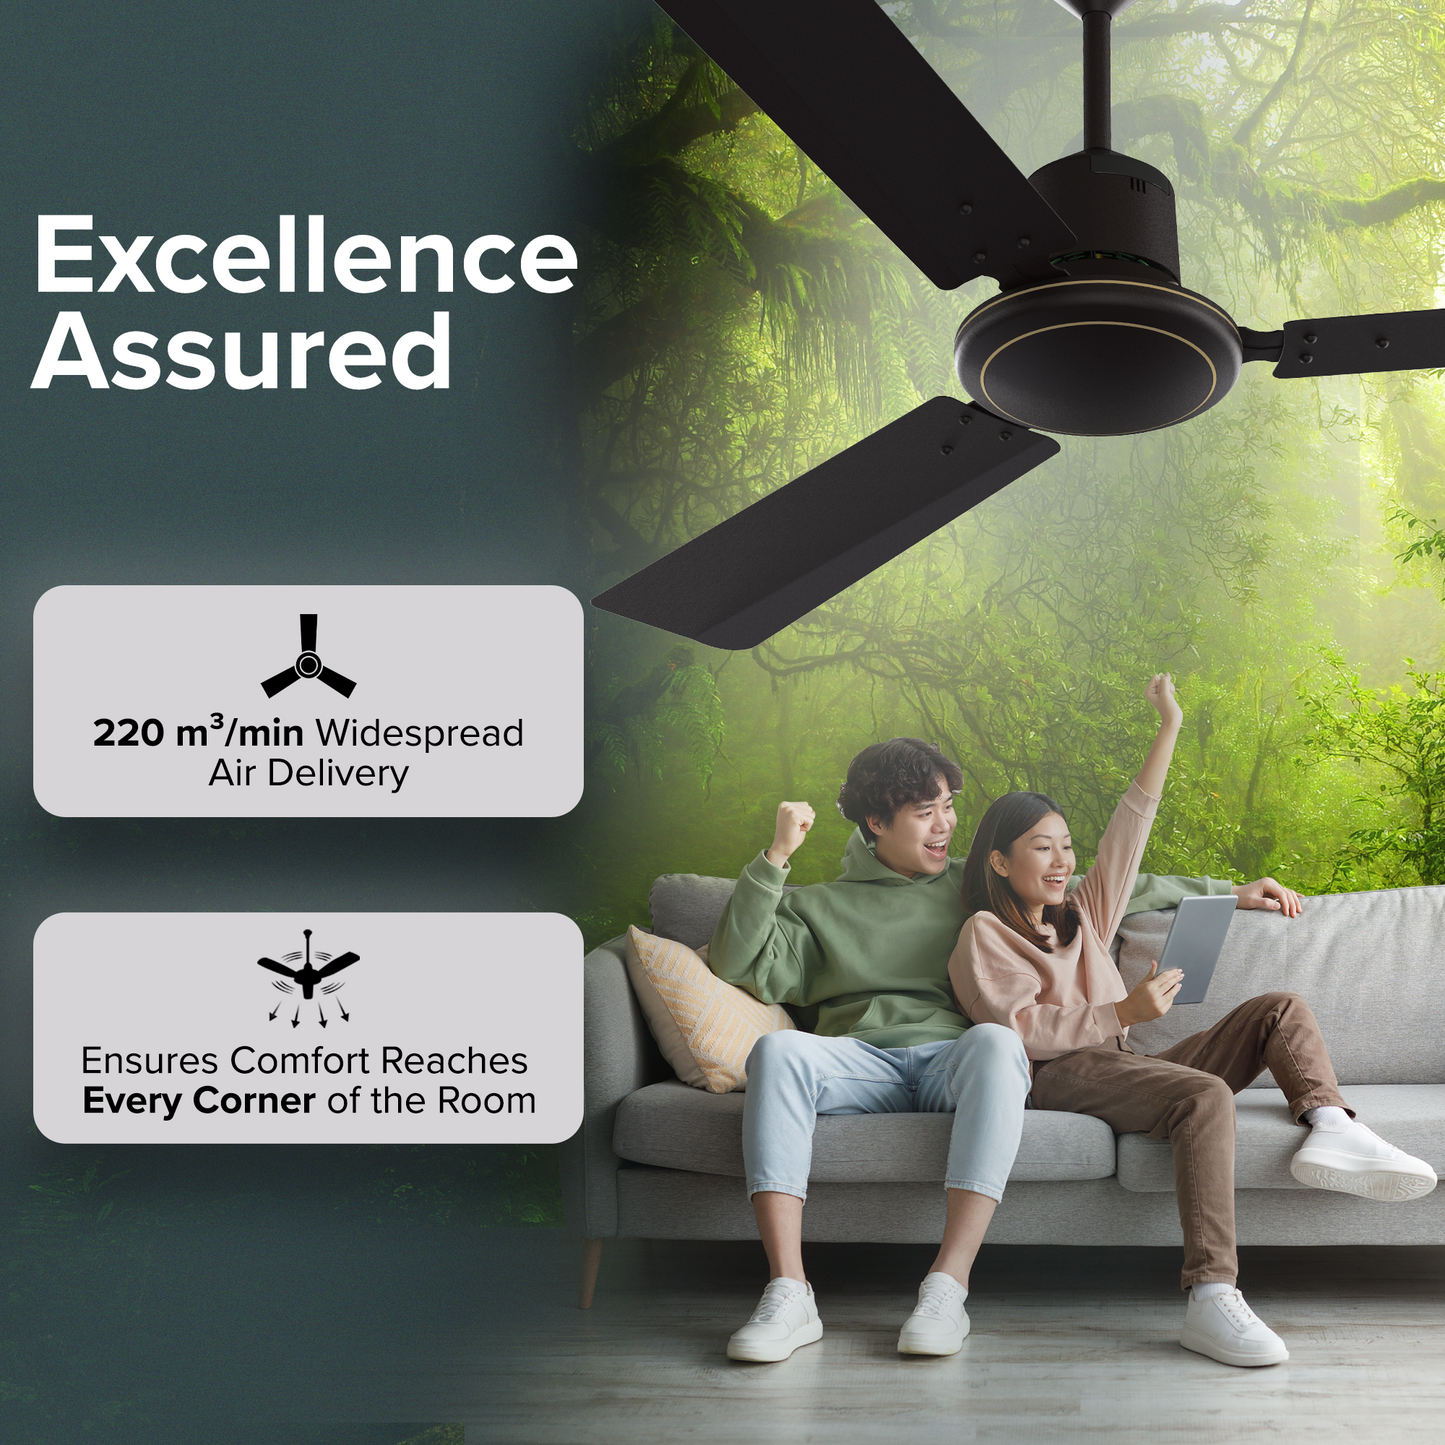 Ecowind Neo Plus BLDC Motor Ceiling Fan with Remote, 1.2 m, Brown, 5 Star Rated